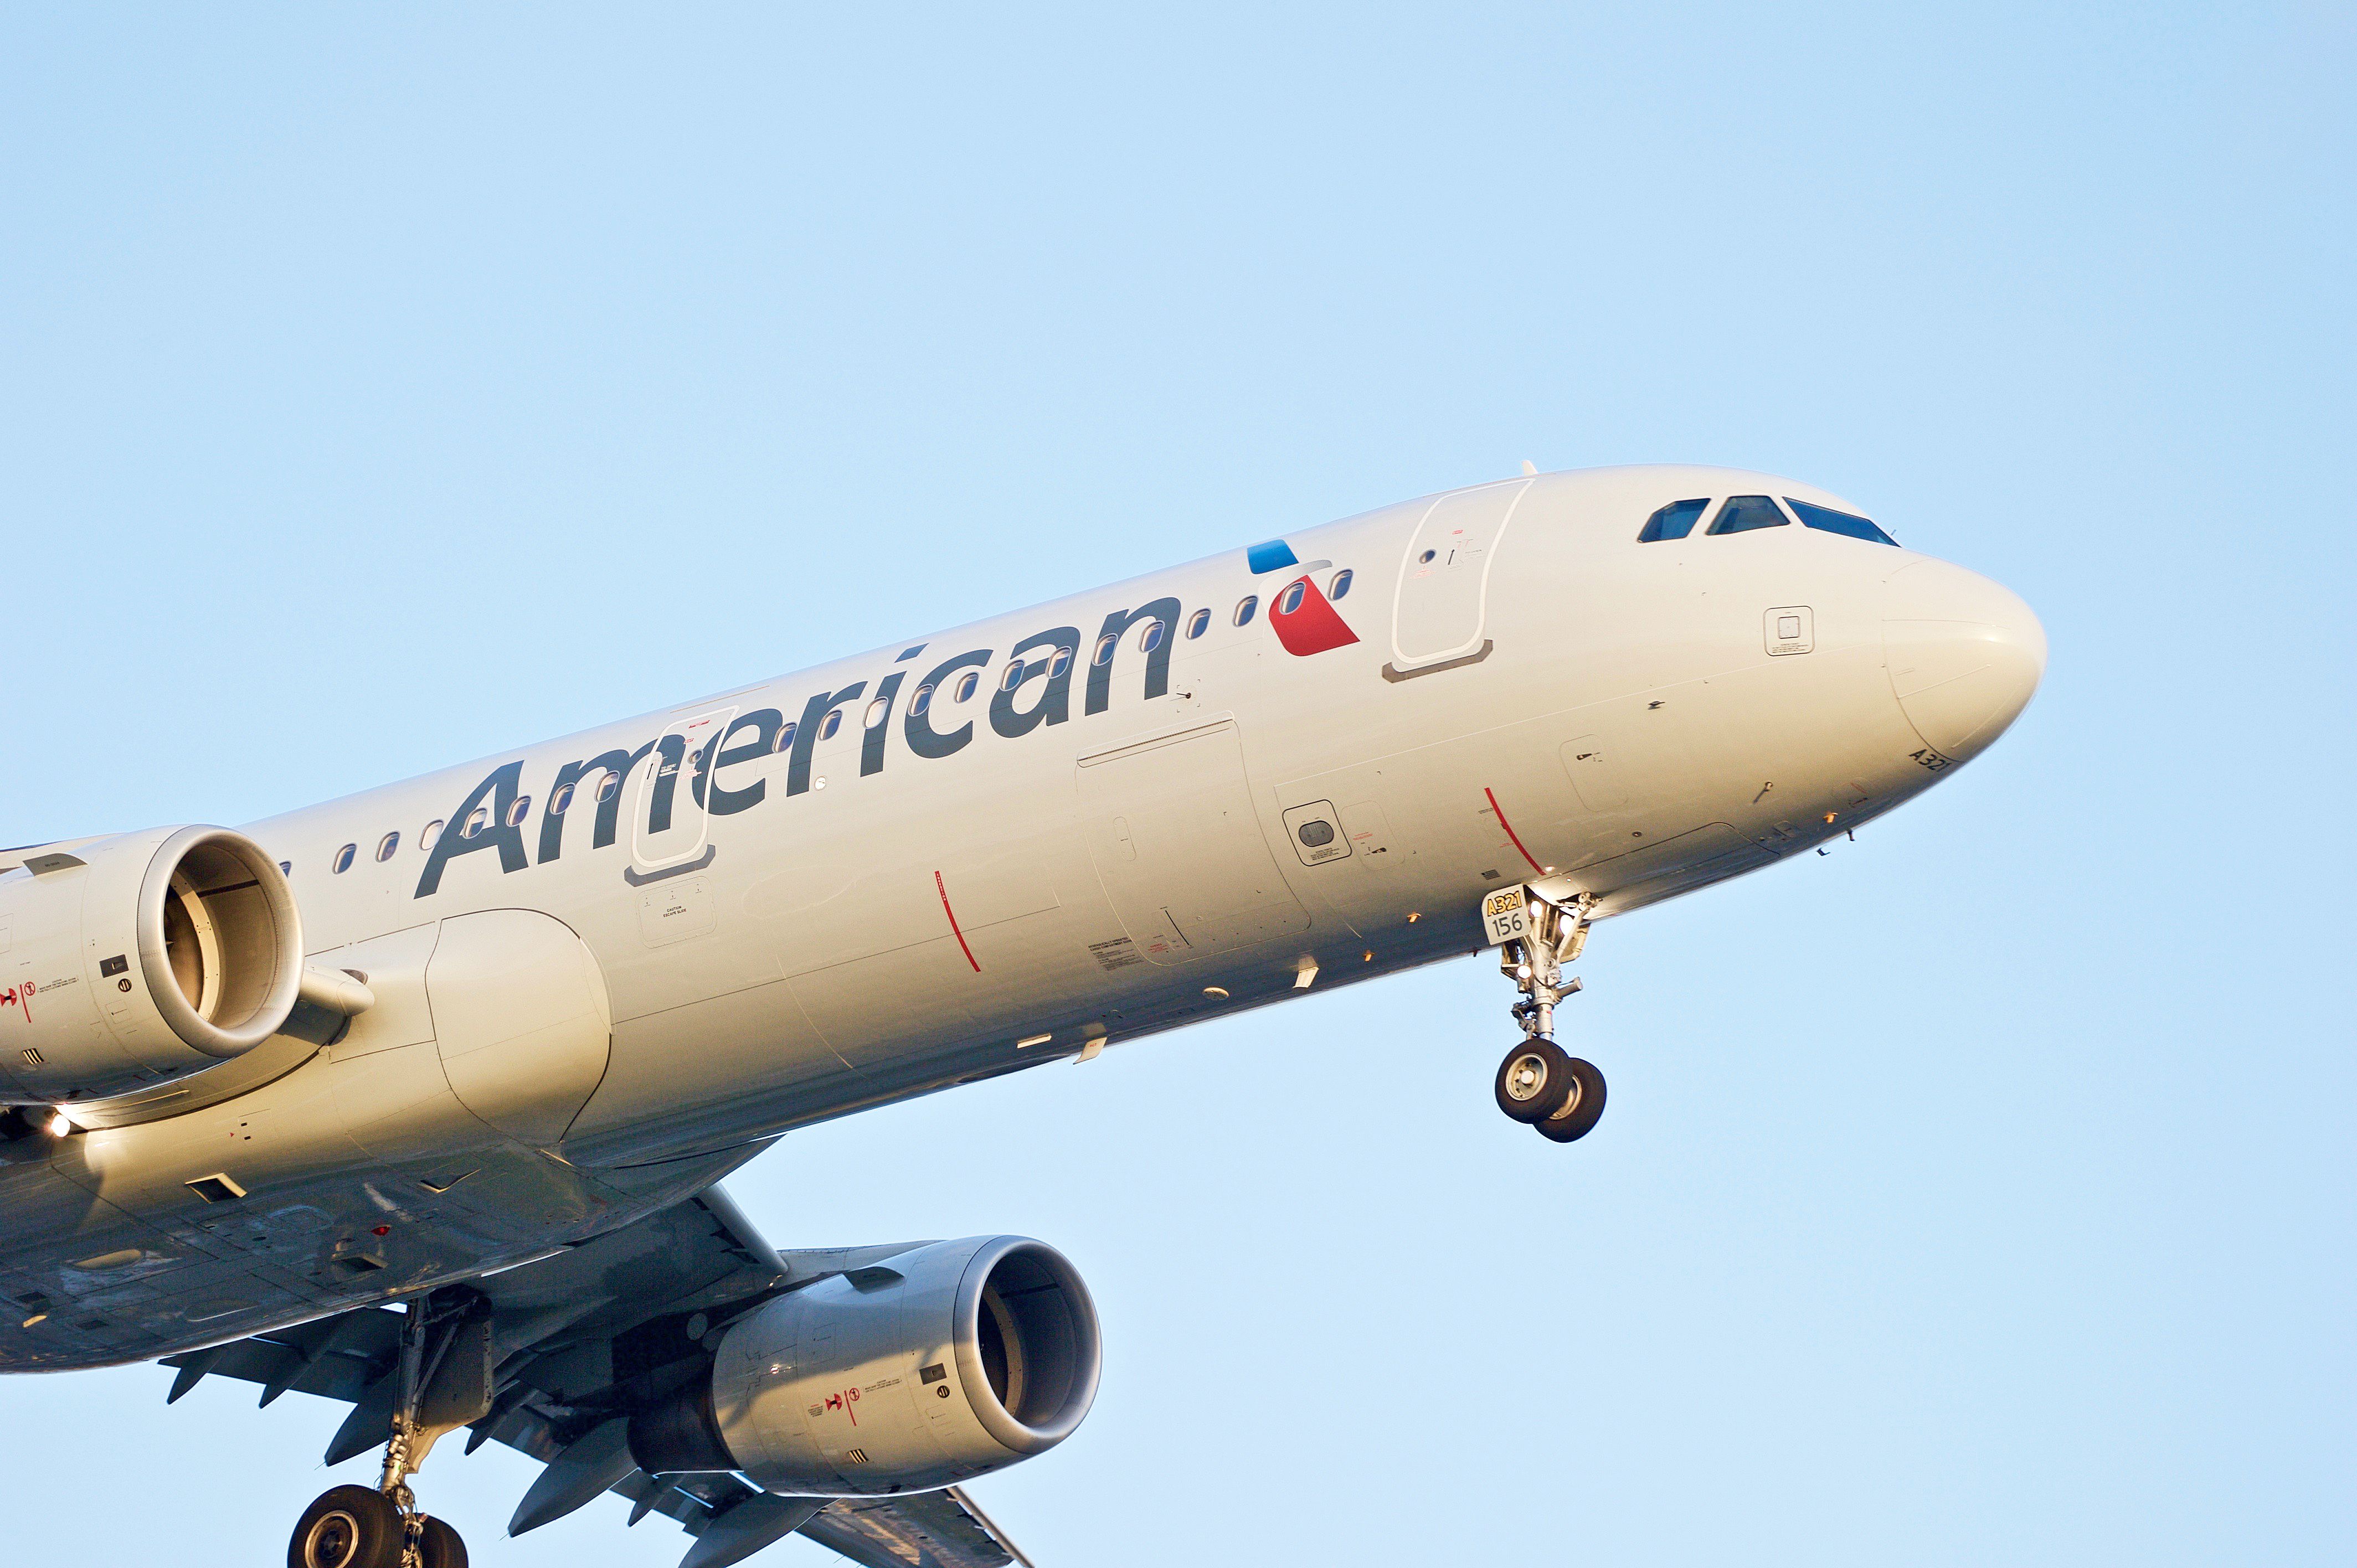 An American Airlines Airbus A321-200 landing